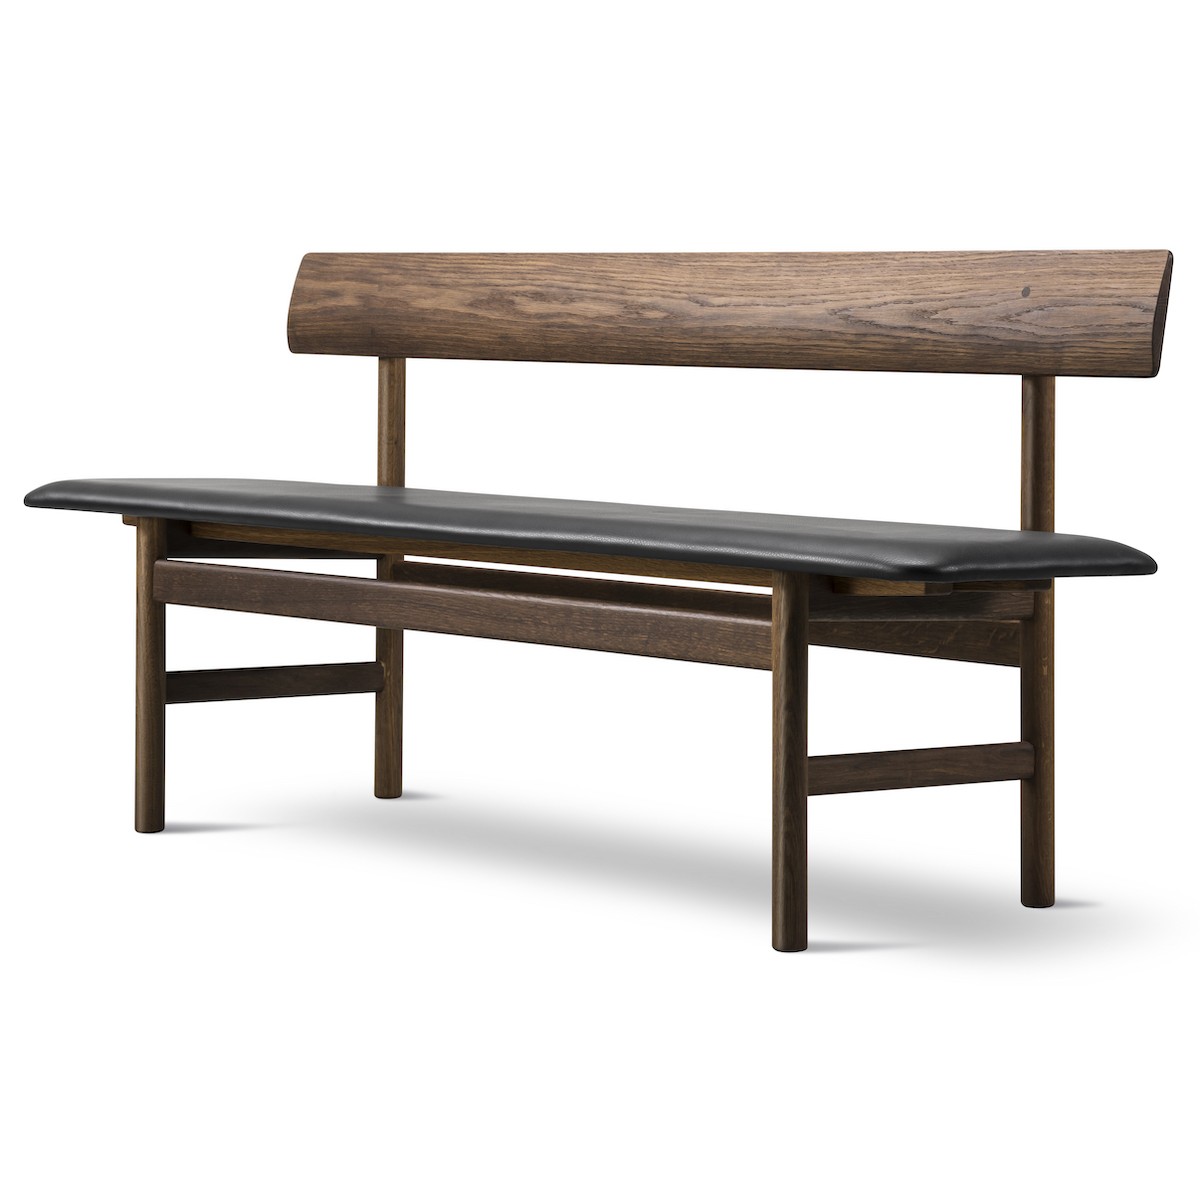 SOLD OUT Smoked oiled oak / Black leather Primo 88 – Mogensen Bench 3171